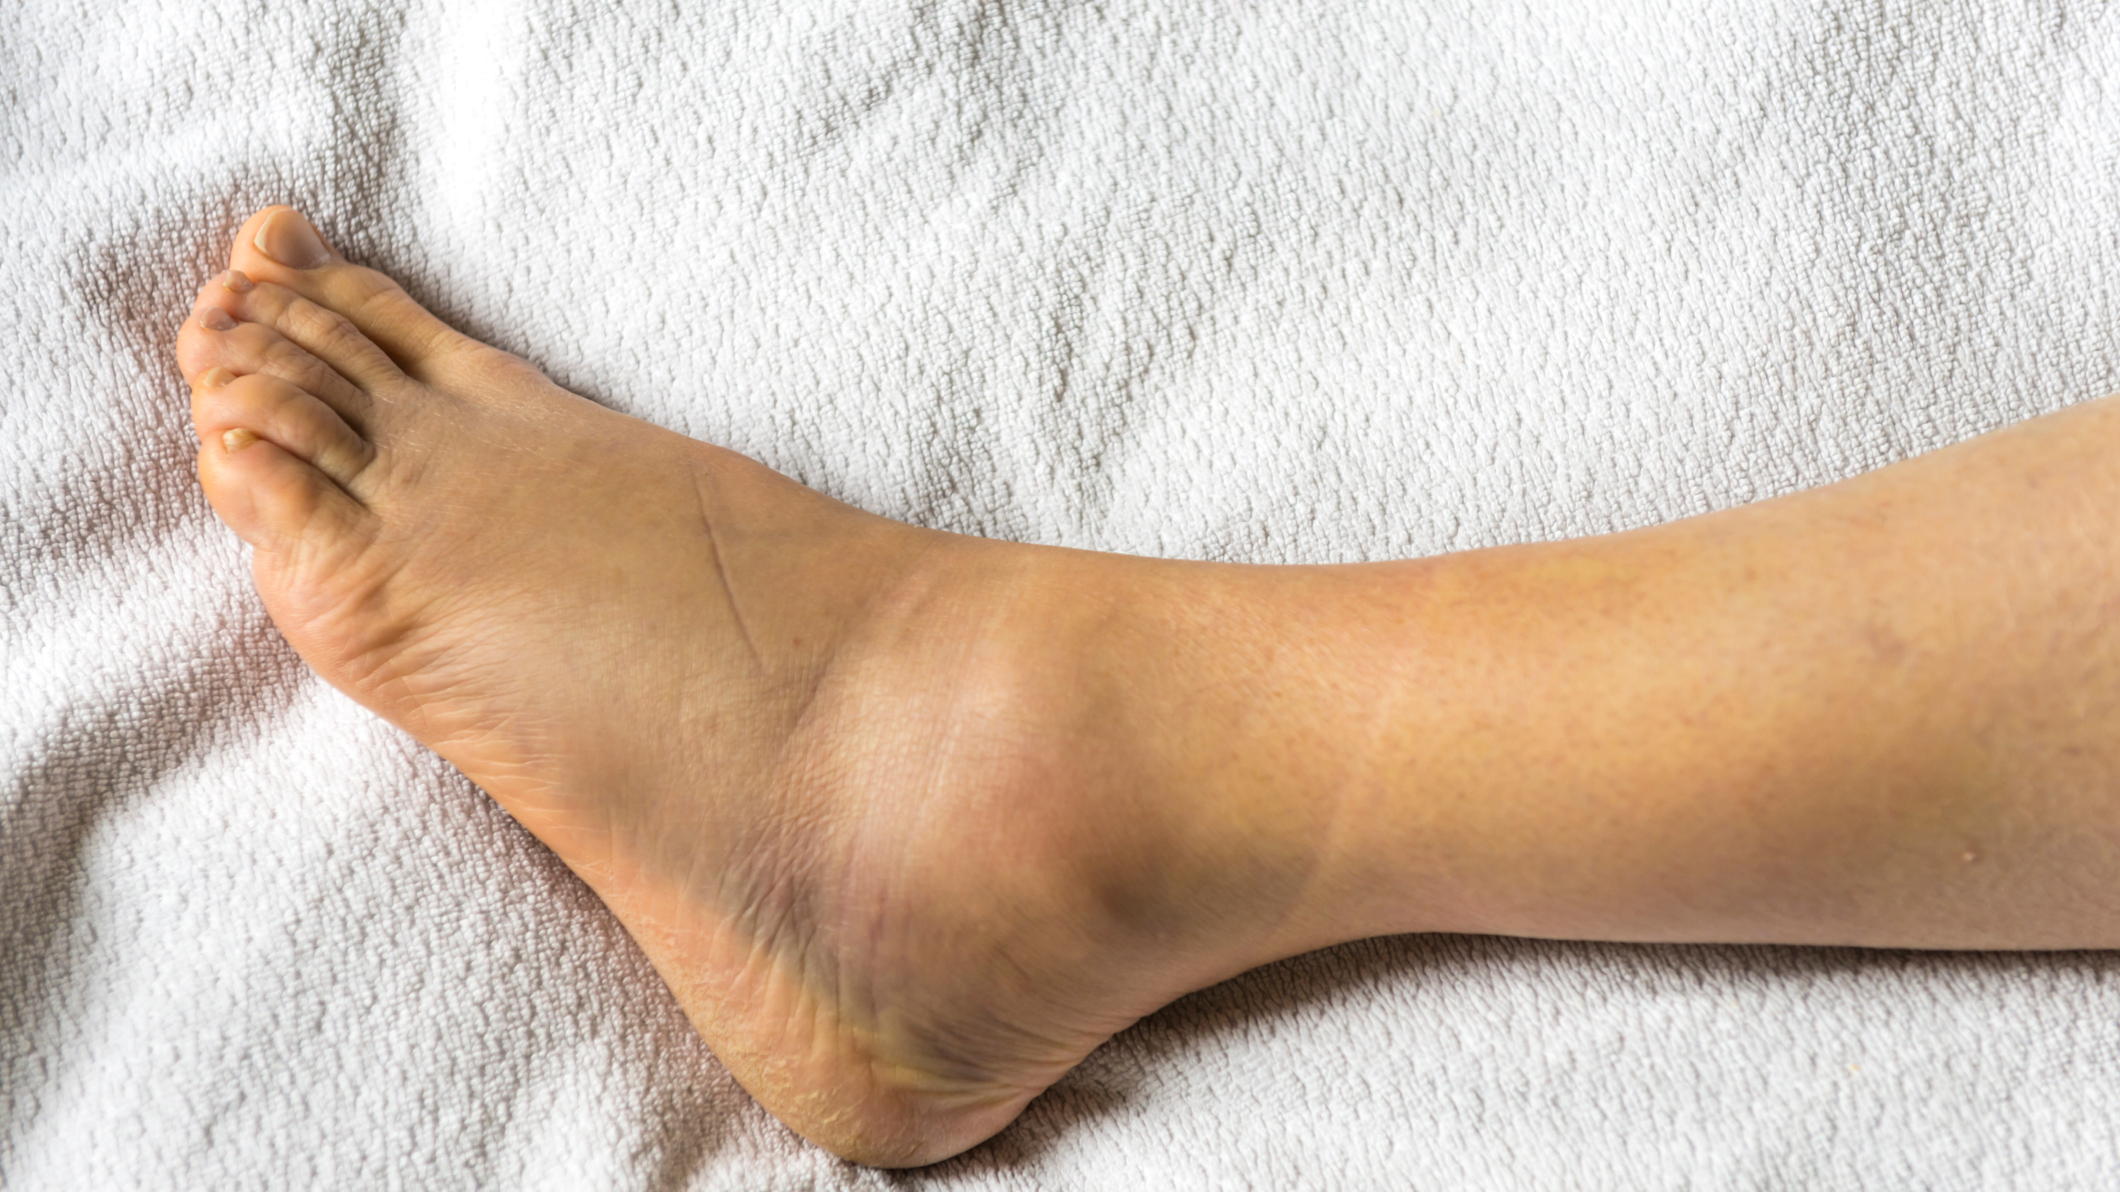 Why Foot Pain In Your Child Is A Bad Sign? - Foot and Ankle